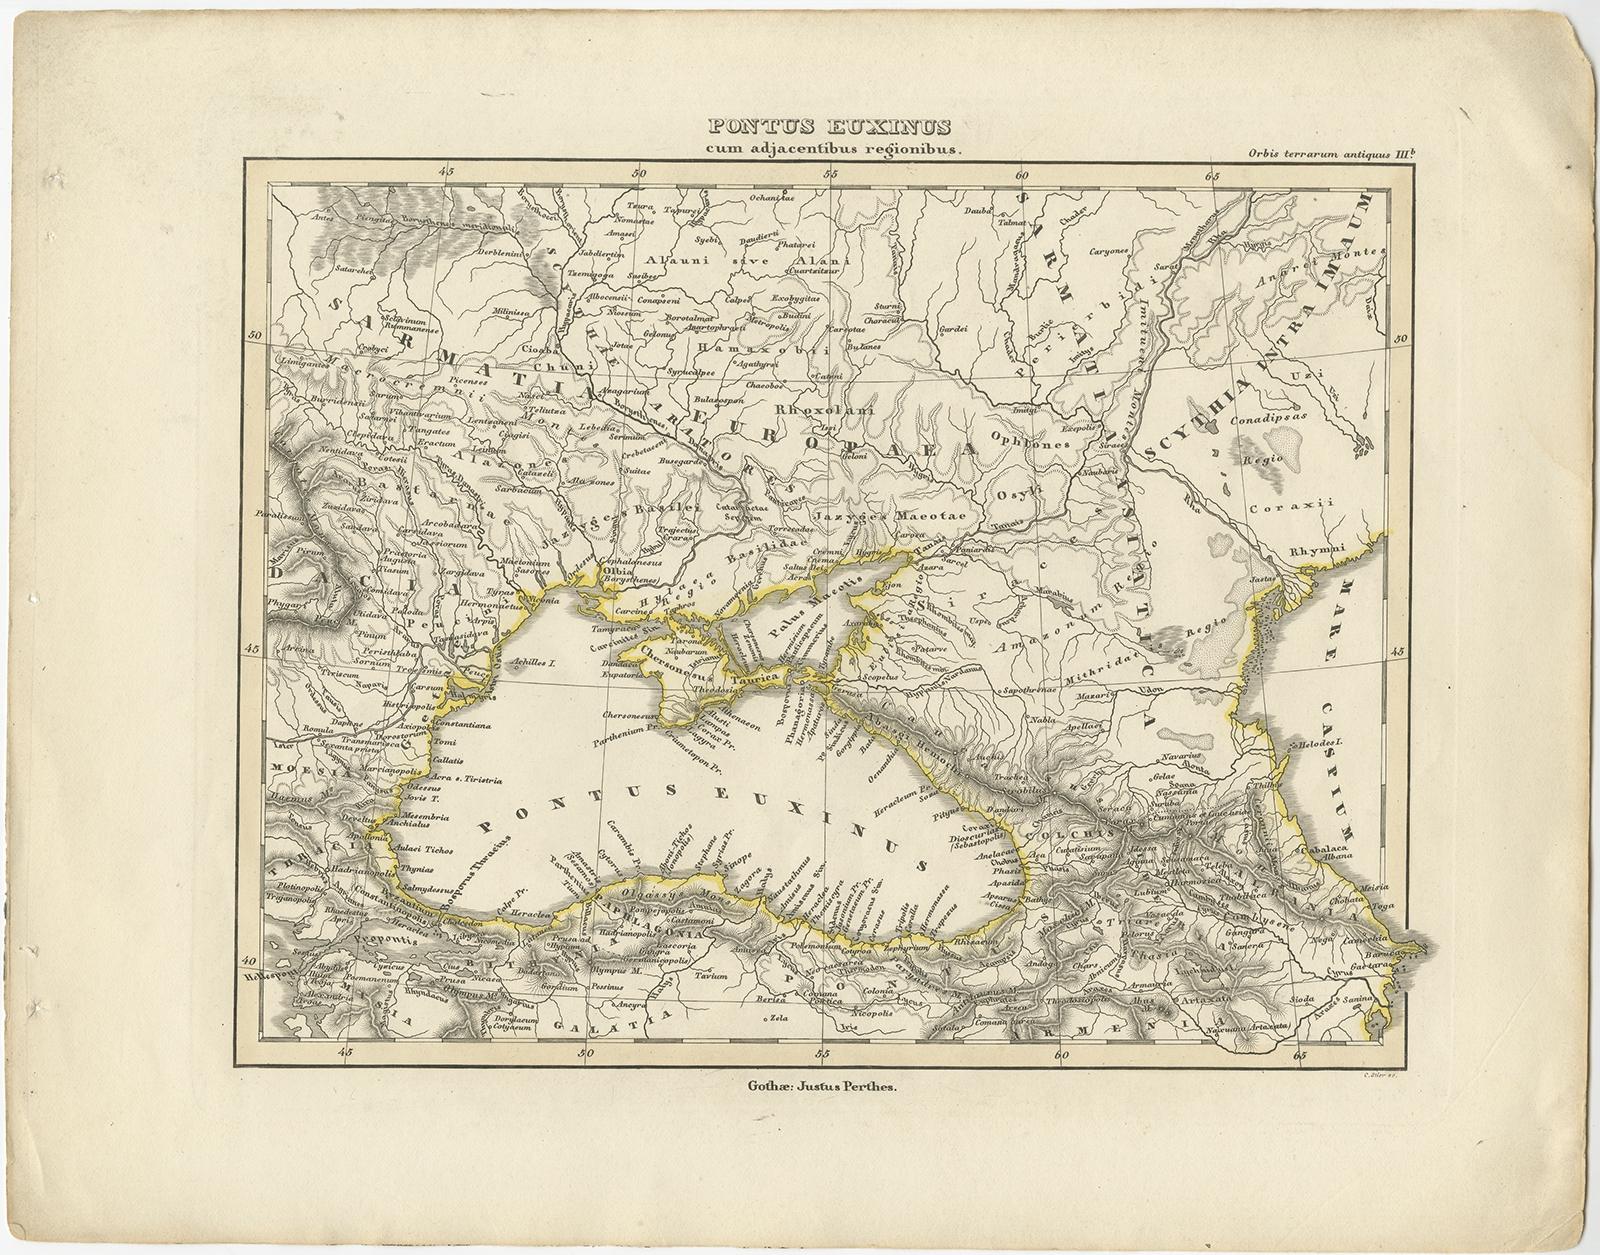 Antique map titled 'Pontus Euxinus'. Old map of the black Sea and surroundings originating from 'Orbis Terrarum Antiquus in usum Scholarum'. 

Artists and Engravers: Published by Justus Perthes, 1848.